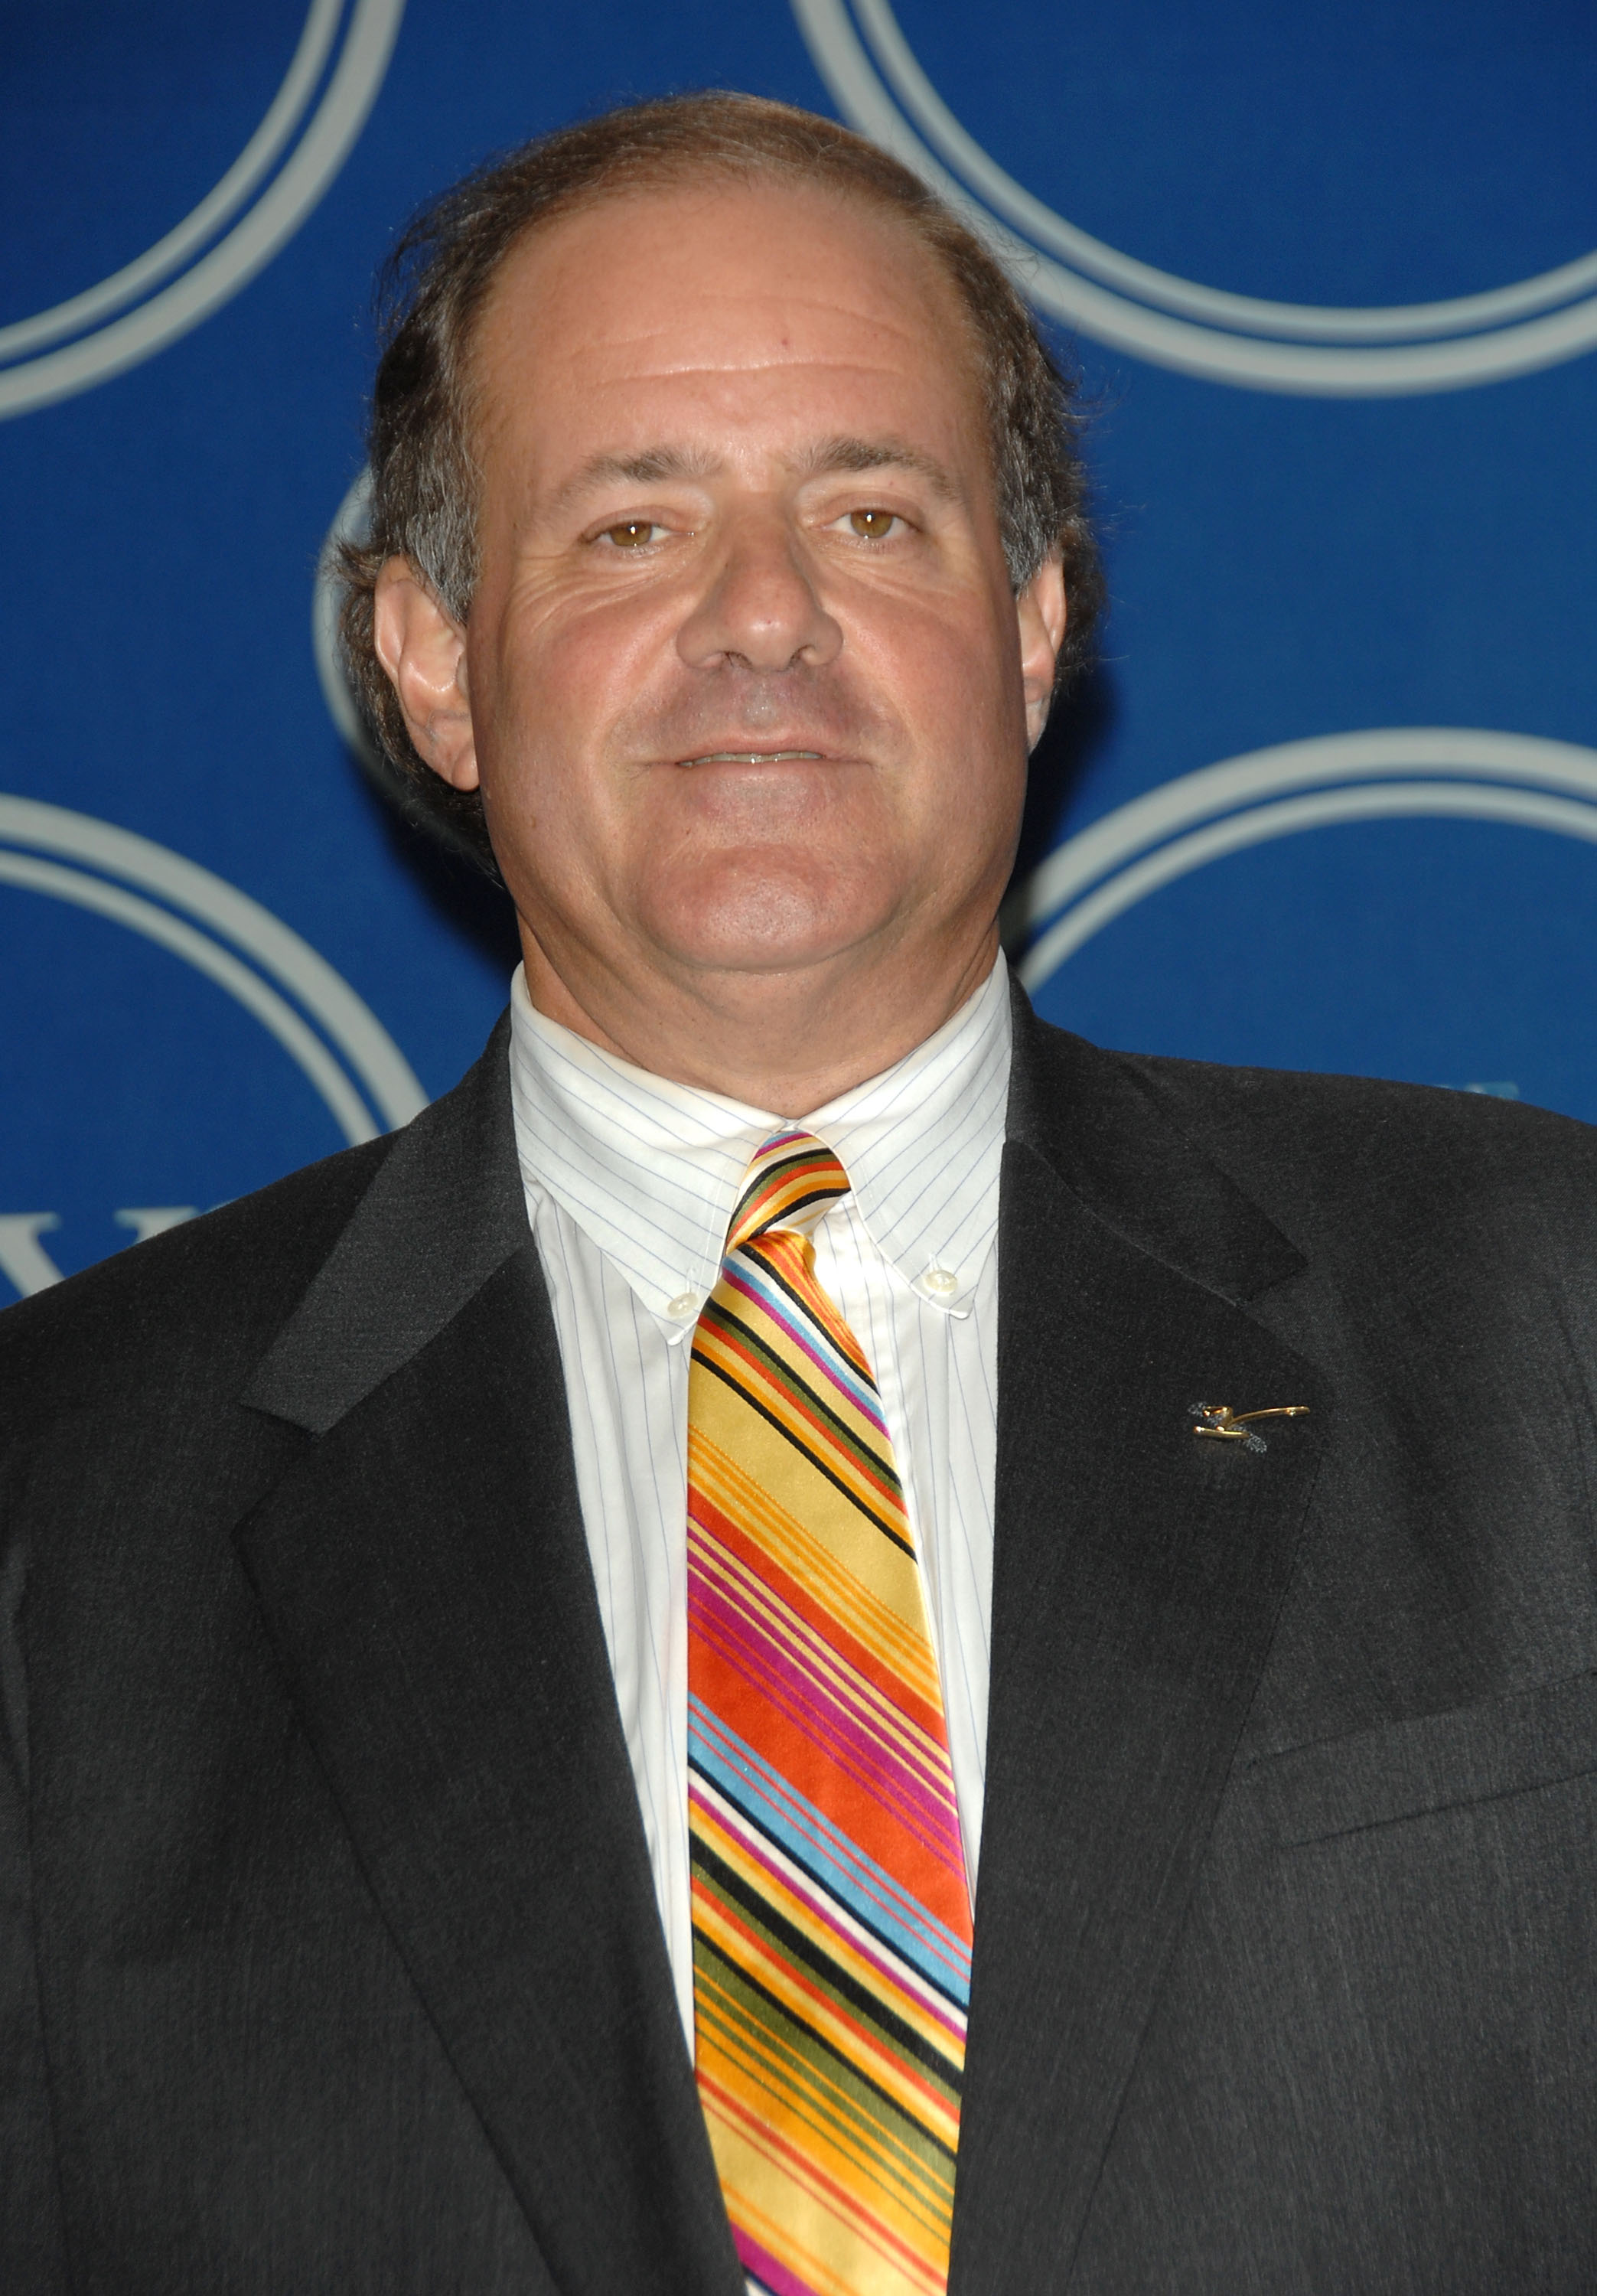 LOS ANGELES, CA - JULY 16:  Television personality Chris Berman poses in the press room at the 2008 ESPY Awards held at NOKIA Theatre L.A. LIVE on July 16, 2008 in Los Angeles, California.  The 2008 ESPYs will air on Sunday, July 20 at 9PM ET on ESPN.  (P